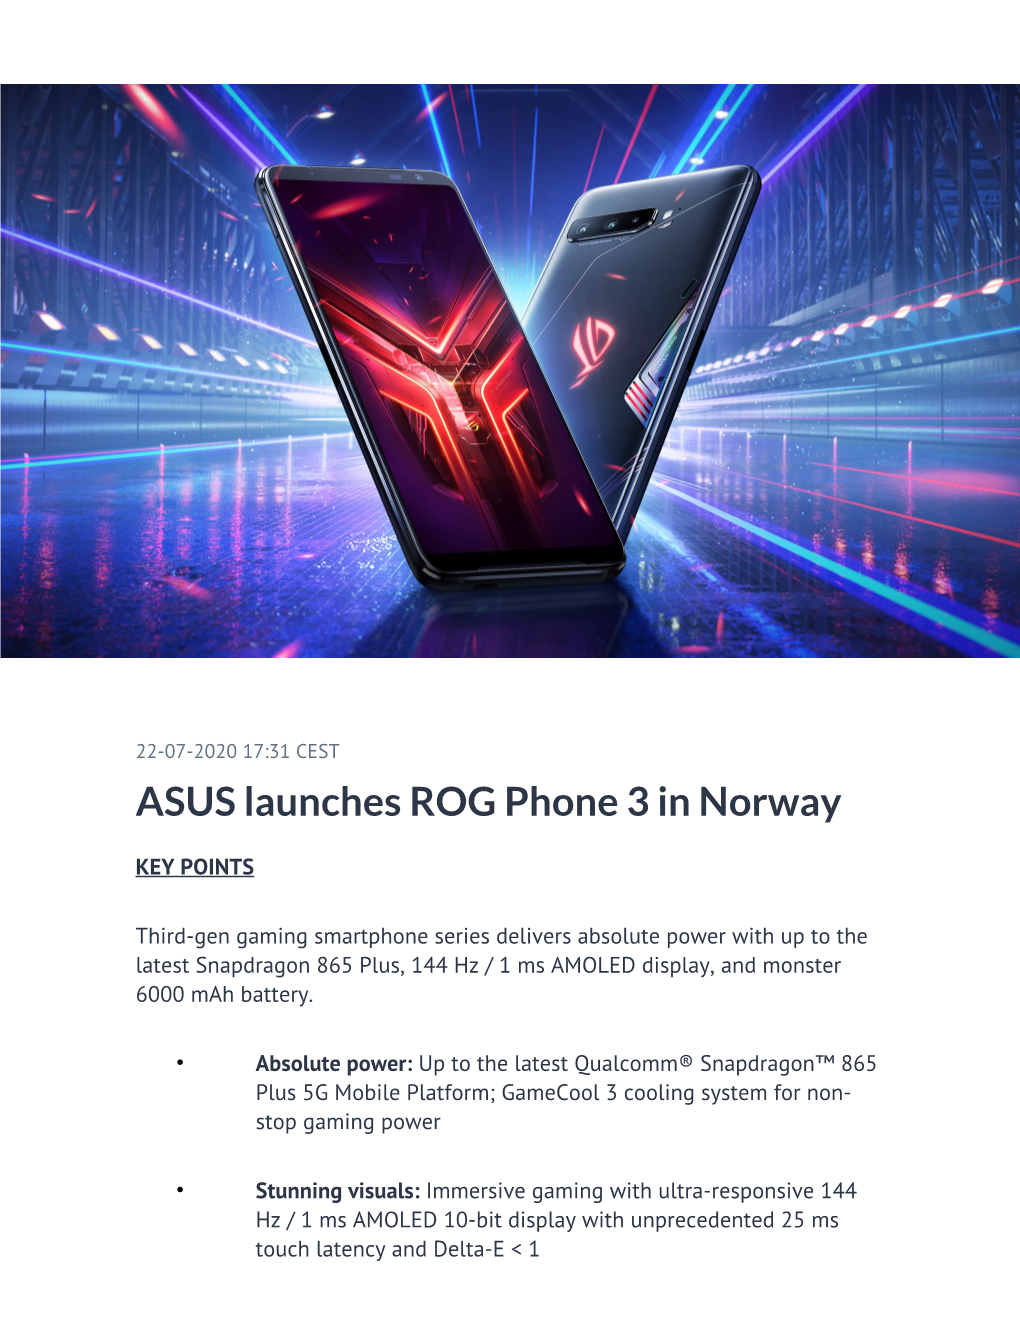 ASUS Launches ROG Phone 3 in Norway